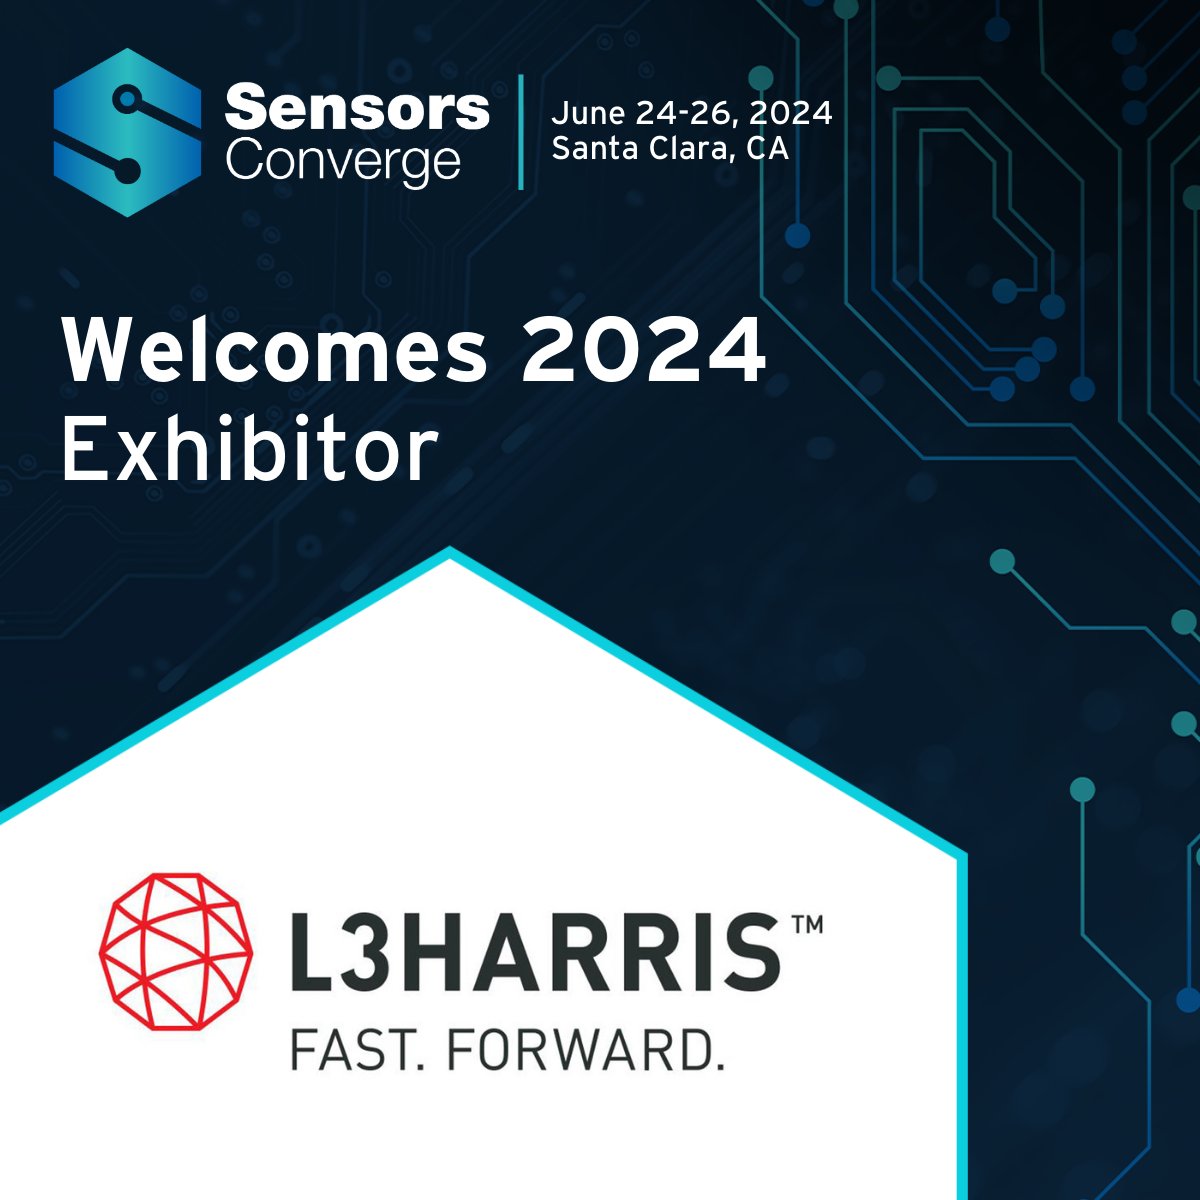 Welcome L3Harris Technologies Acoustic Sensors to #SensorsConverge! L3Harris offers components, sensors and transducers for medical imaging, flow sensing and surgical applications. Learn more: loom.ly/KkeP8Qk Register: June 24-26 in Santa Clara loom.ly/L1clL-A